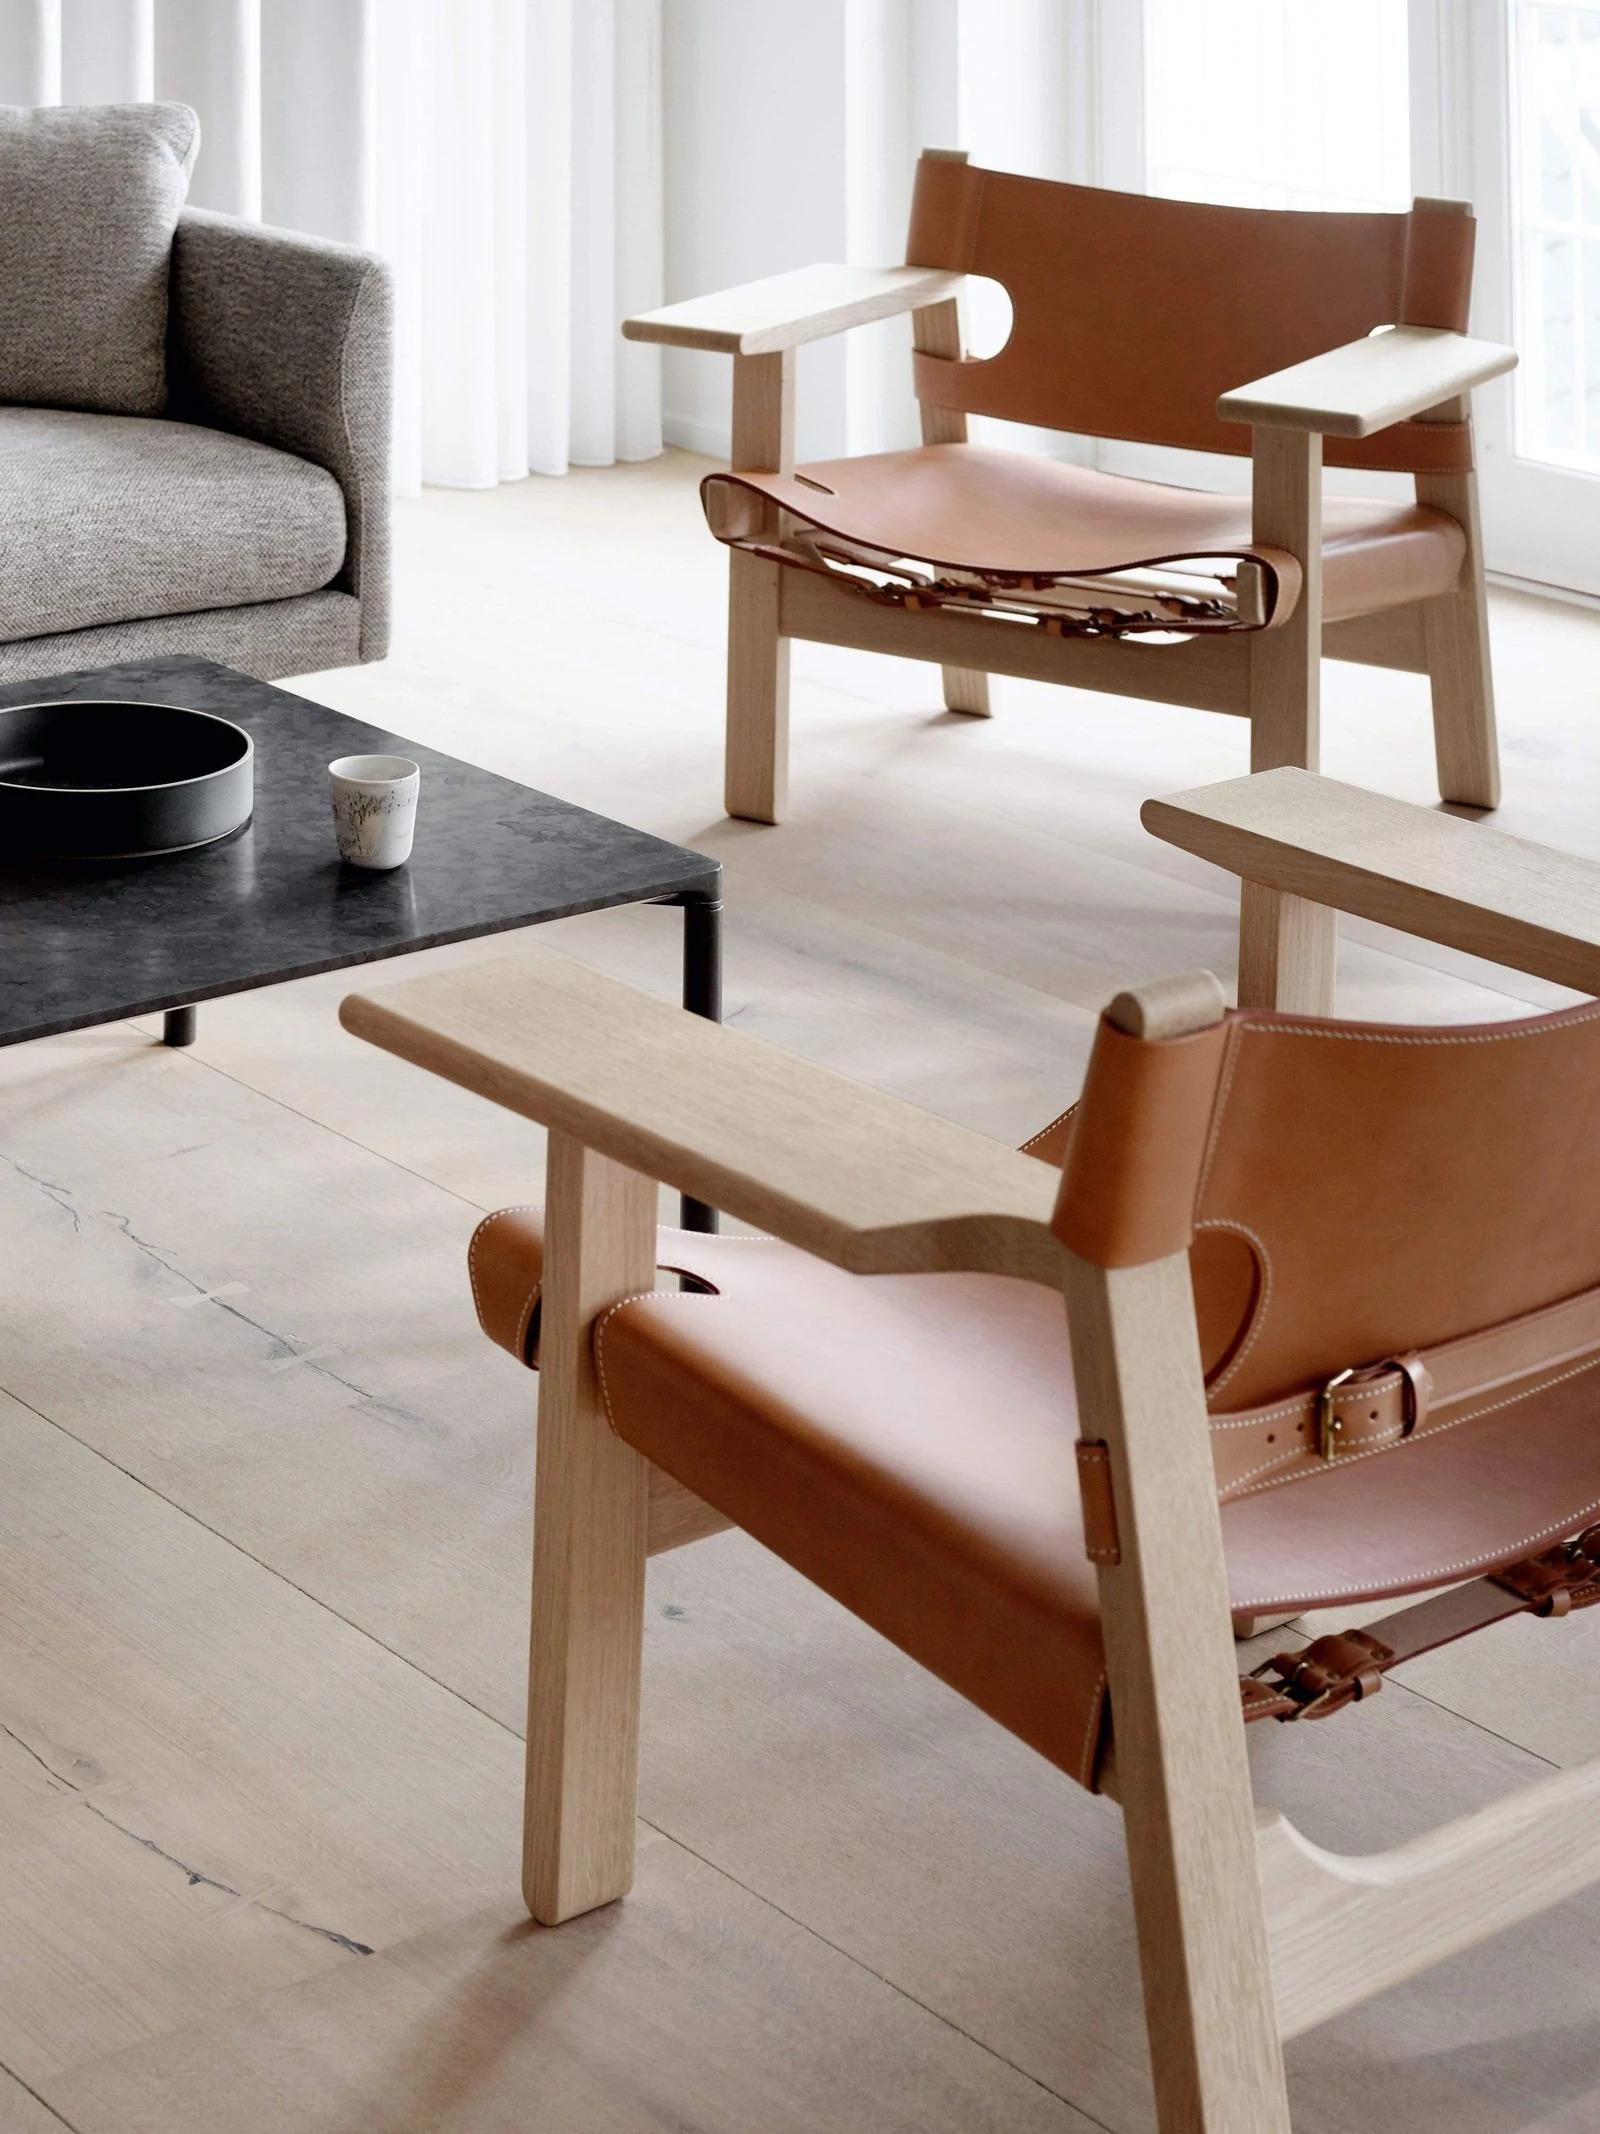 In 1958, Børge Mogensen and his family travelled to Spain. In Andalucia he fell in love with an old chair with a wide seat and broad armrests. Once back in Denmark, he created The Spanish Chair.

The chair he fell in love with is a traditional